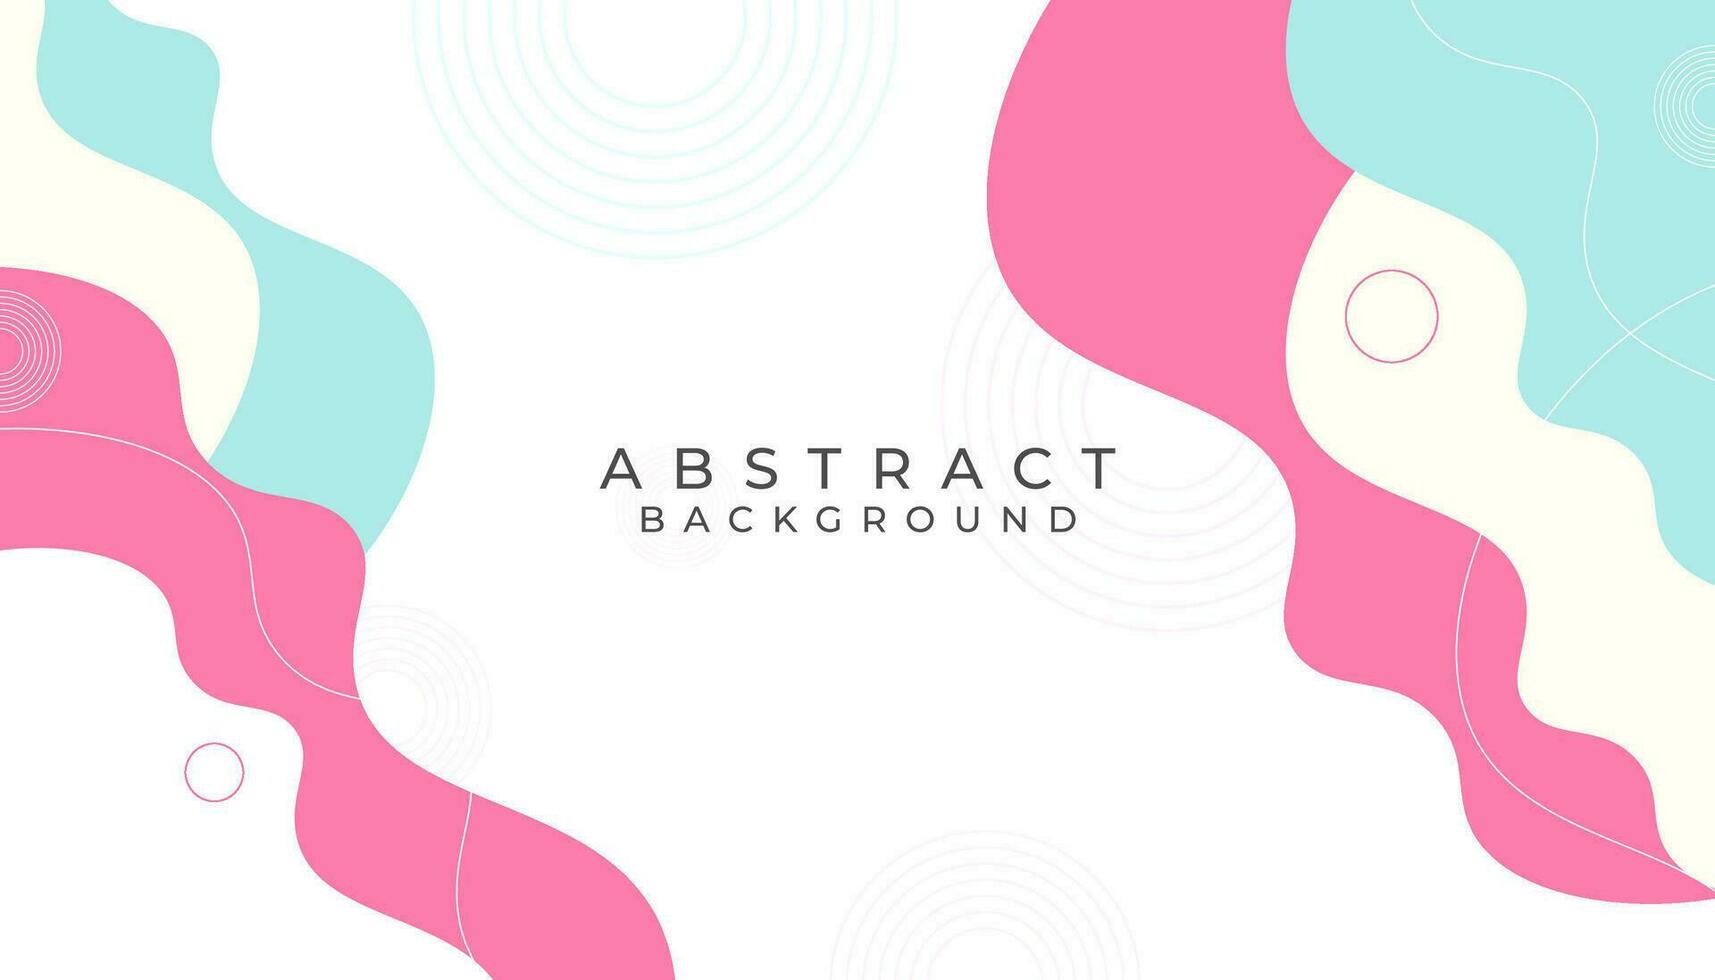 Abstract flat colorful geometric shapes background vector